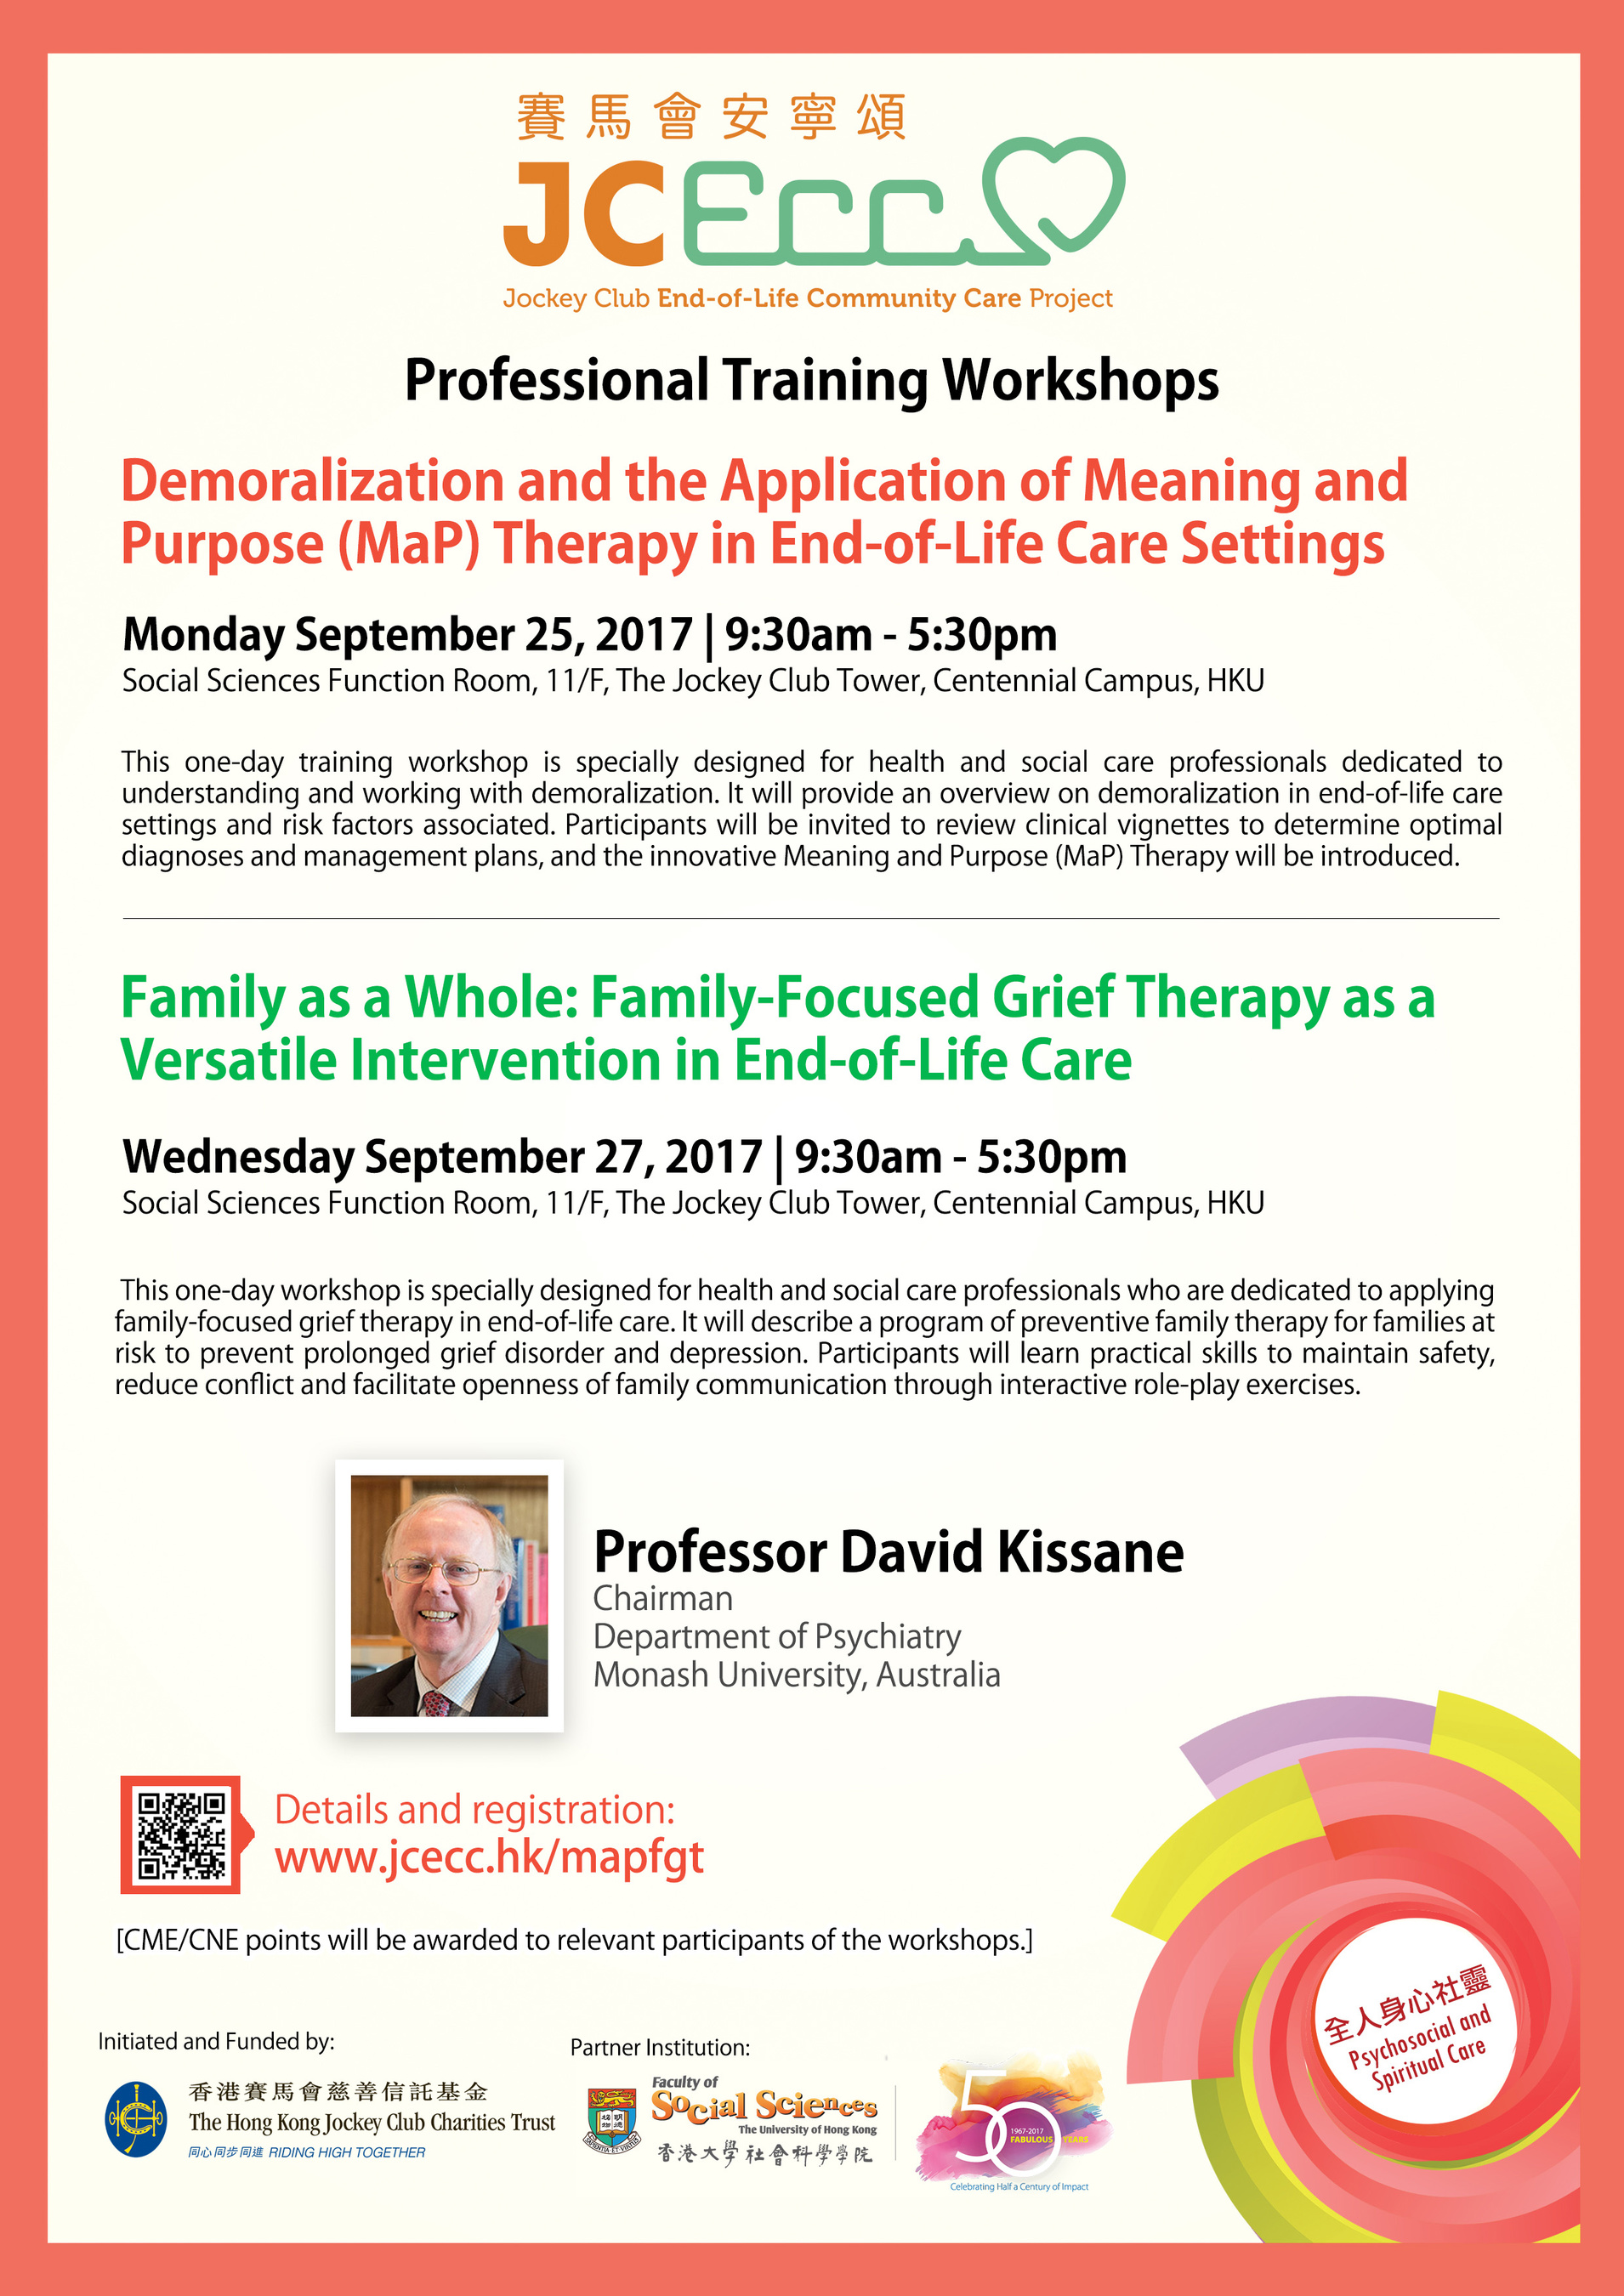 JCECC Workshop on Meaning and Purpose Therapy in EoLC Settings & Workshop on Family-focused Grief Therapy as a Versatile Intervention in EoL